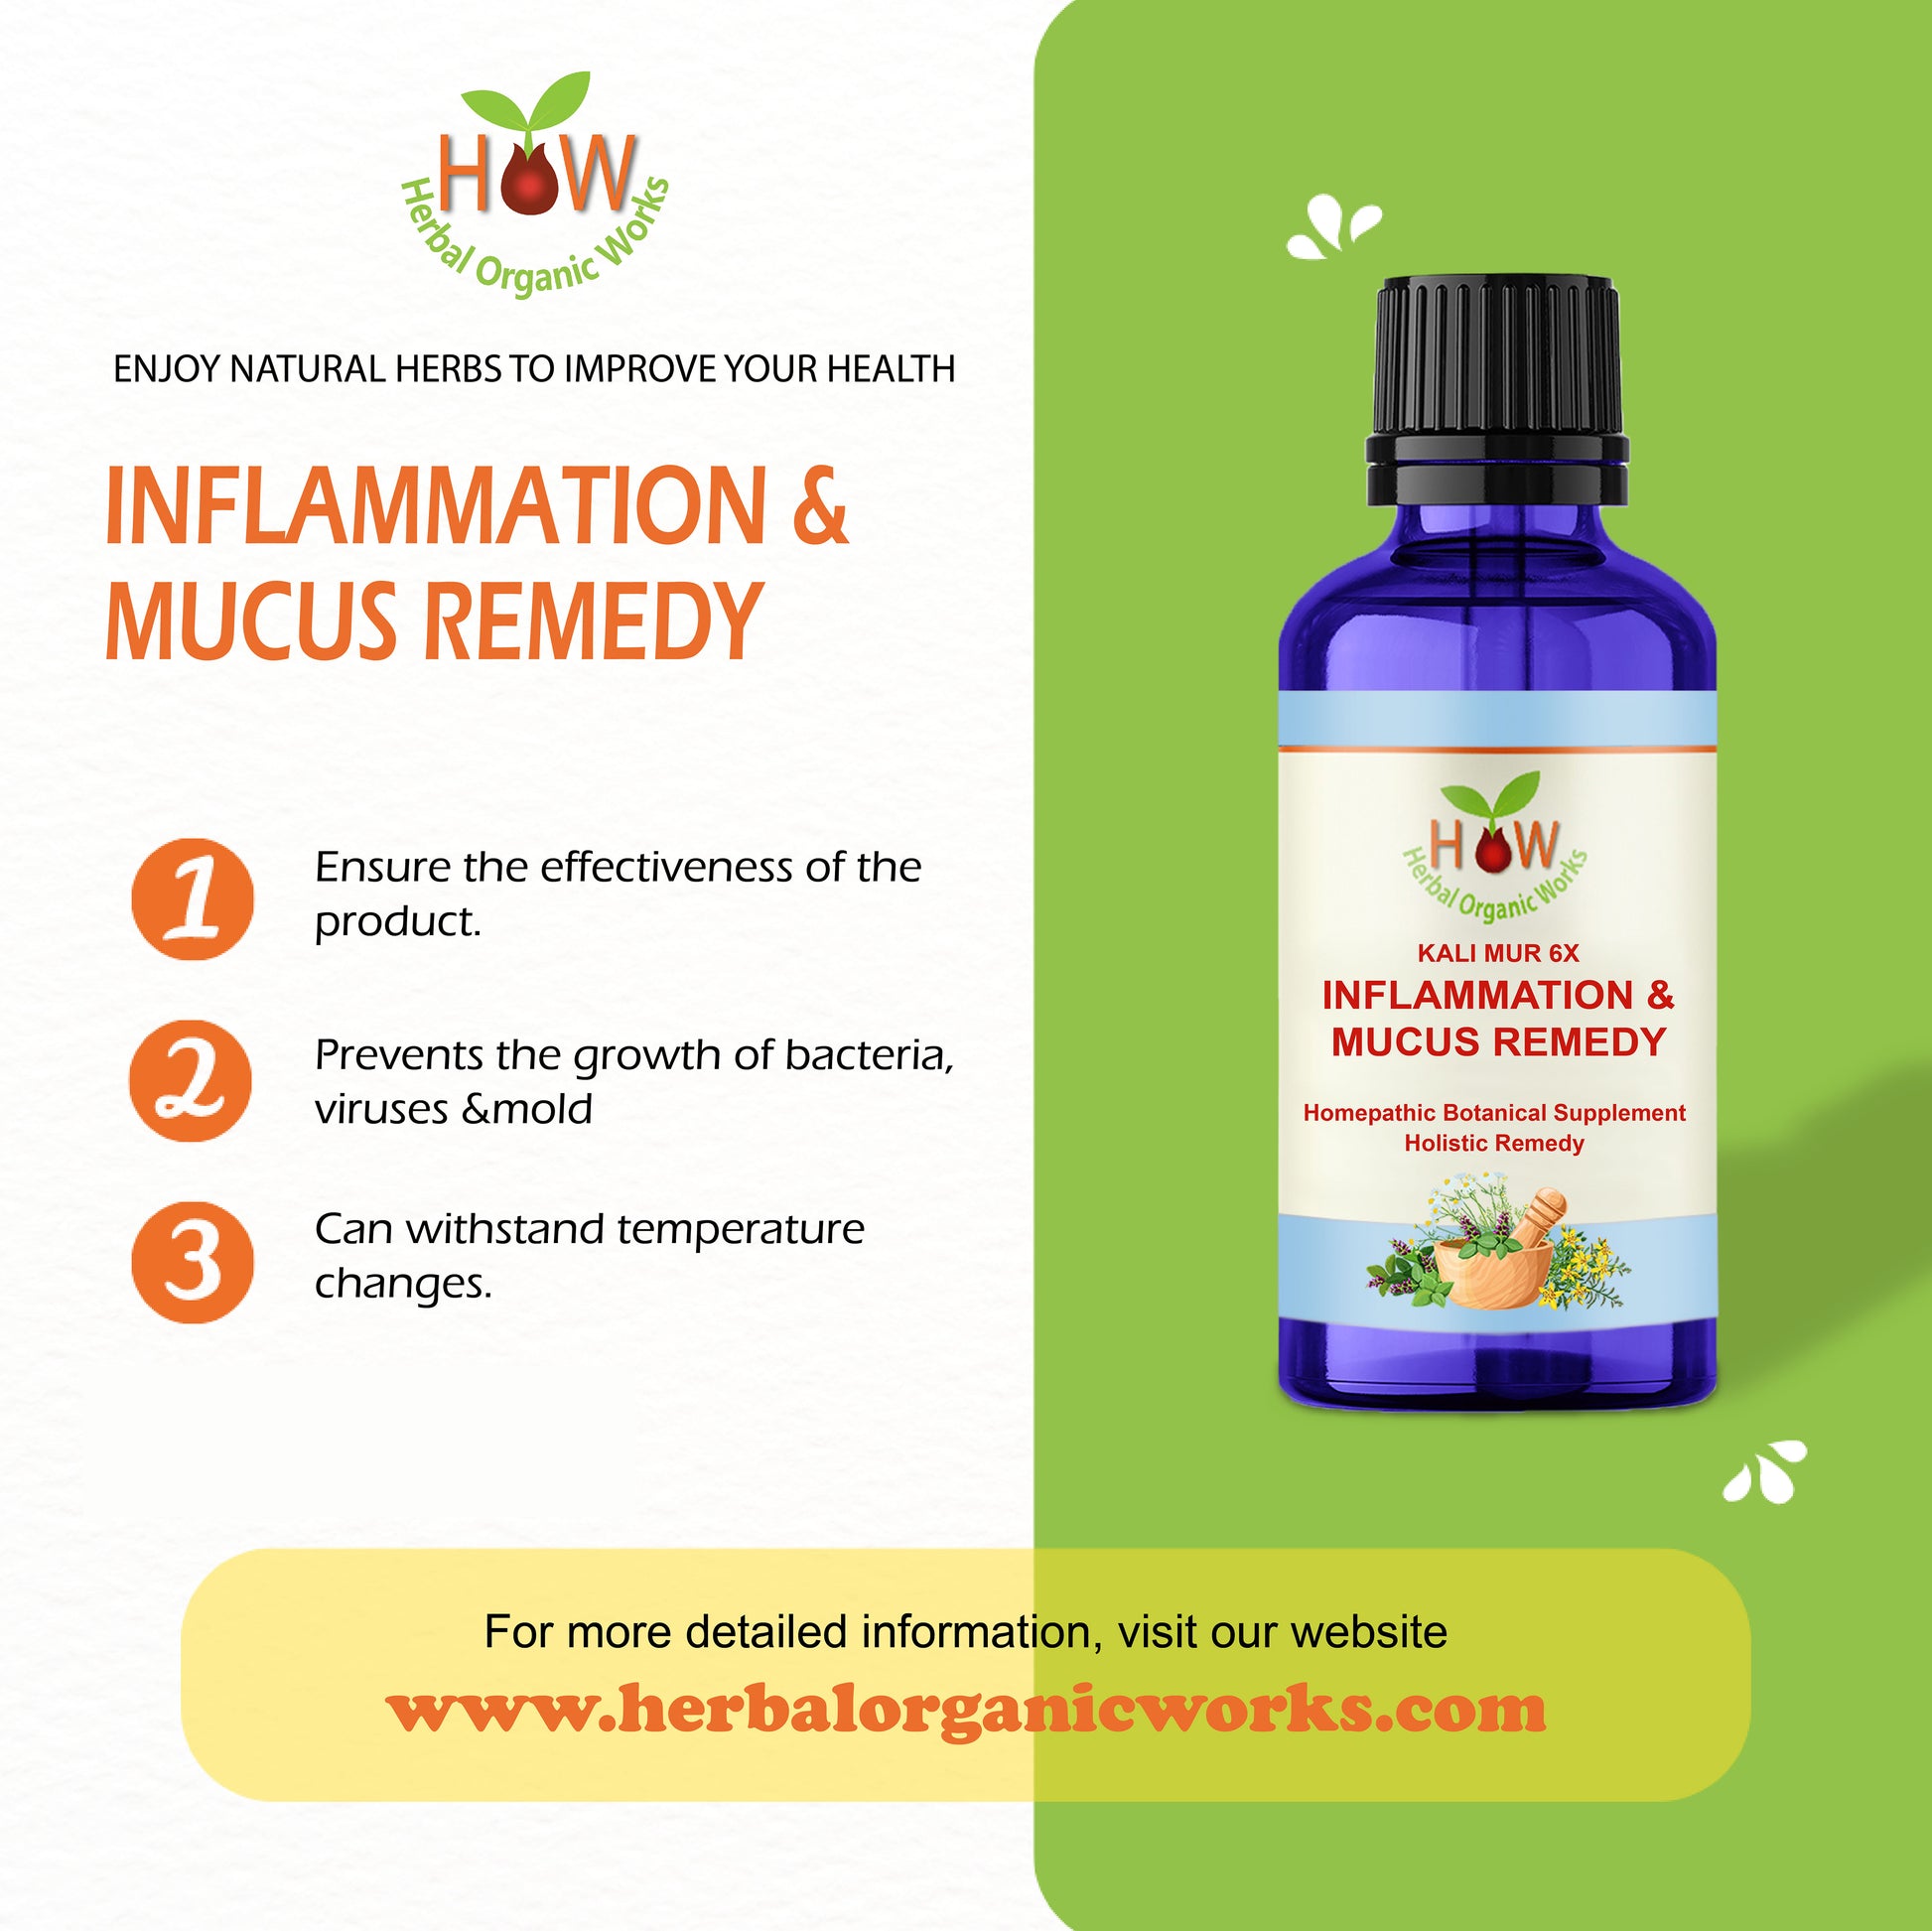 INFLAMATION AND MUCUS REMEDY